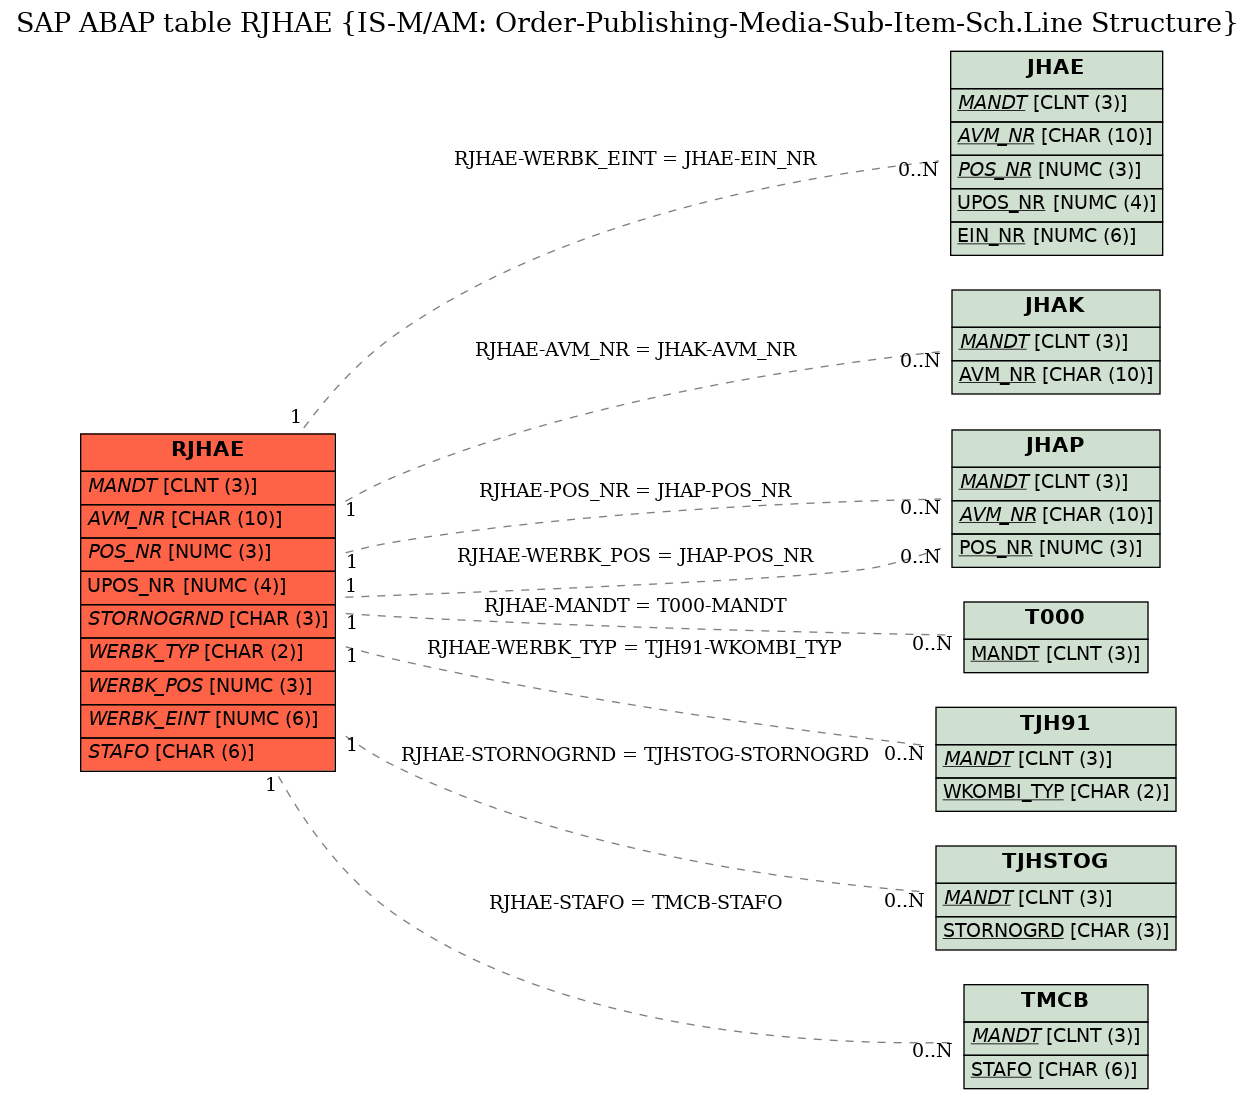 E-R Diagram for table RJHAE (IS-M/AM: Order-Publishing-Media-Sub-Item-Sch.Line Structure)